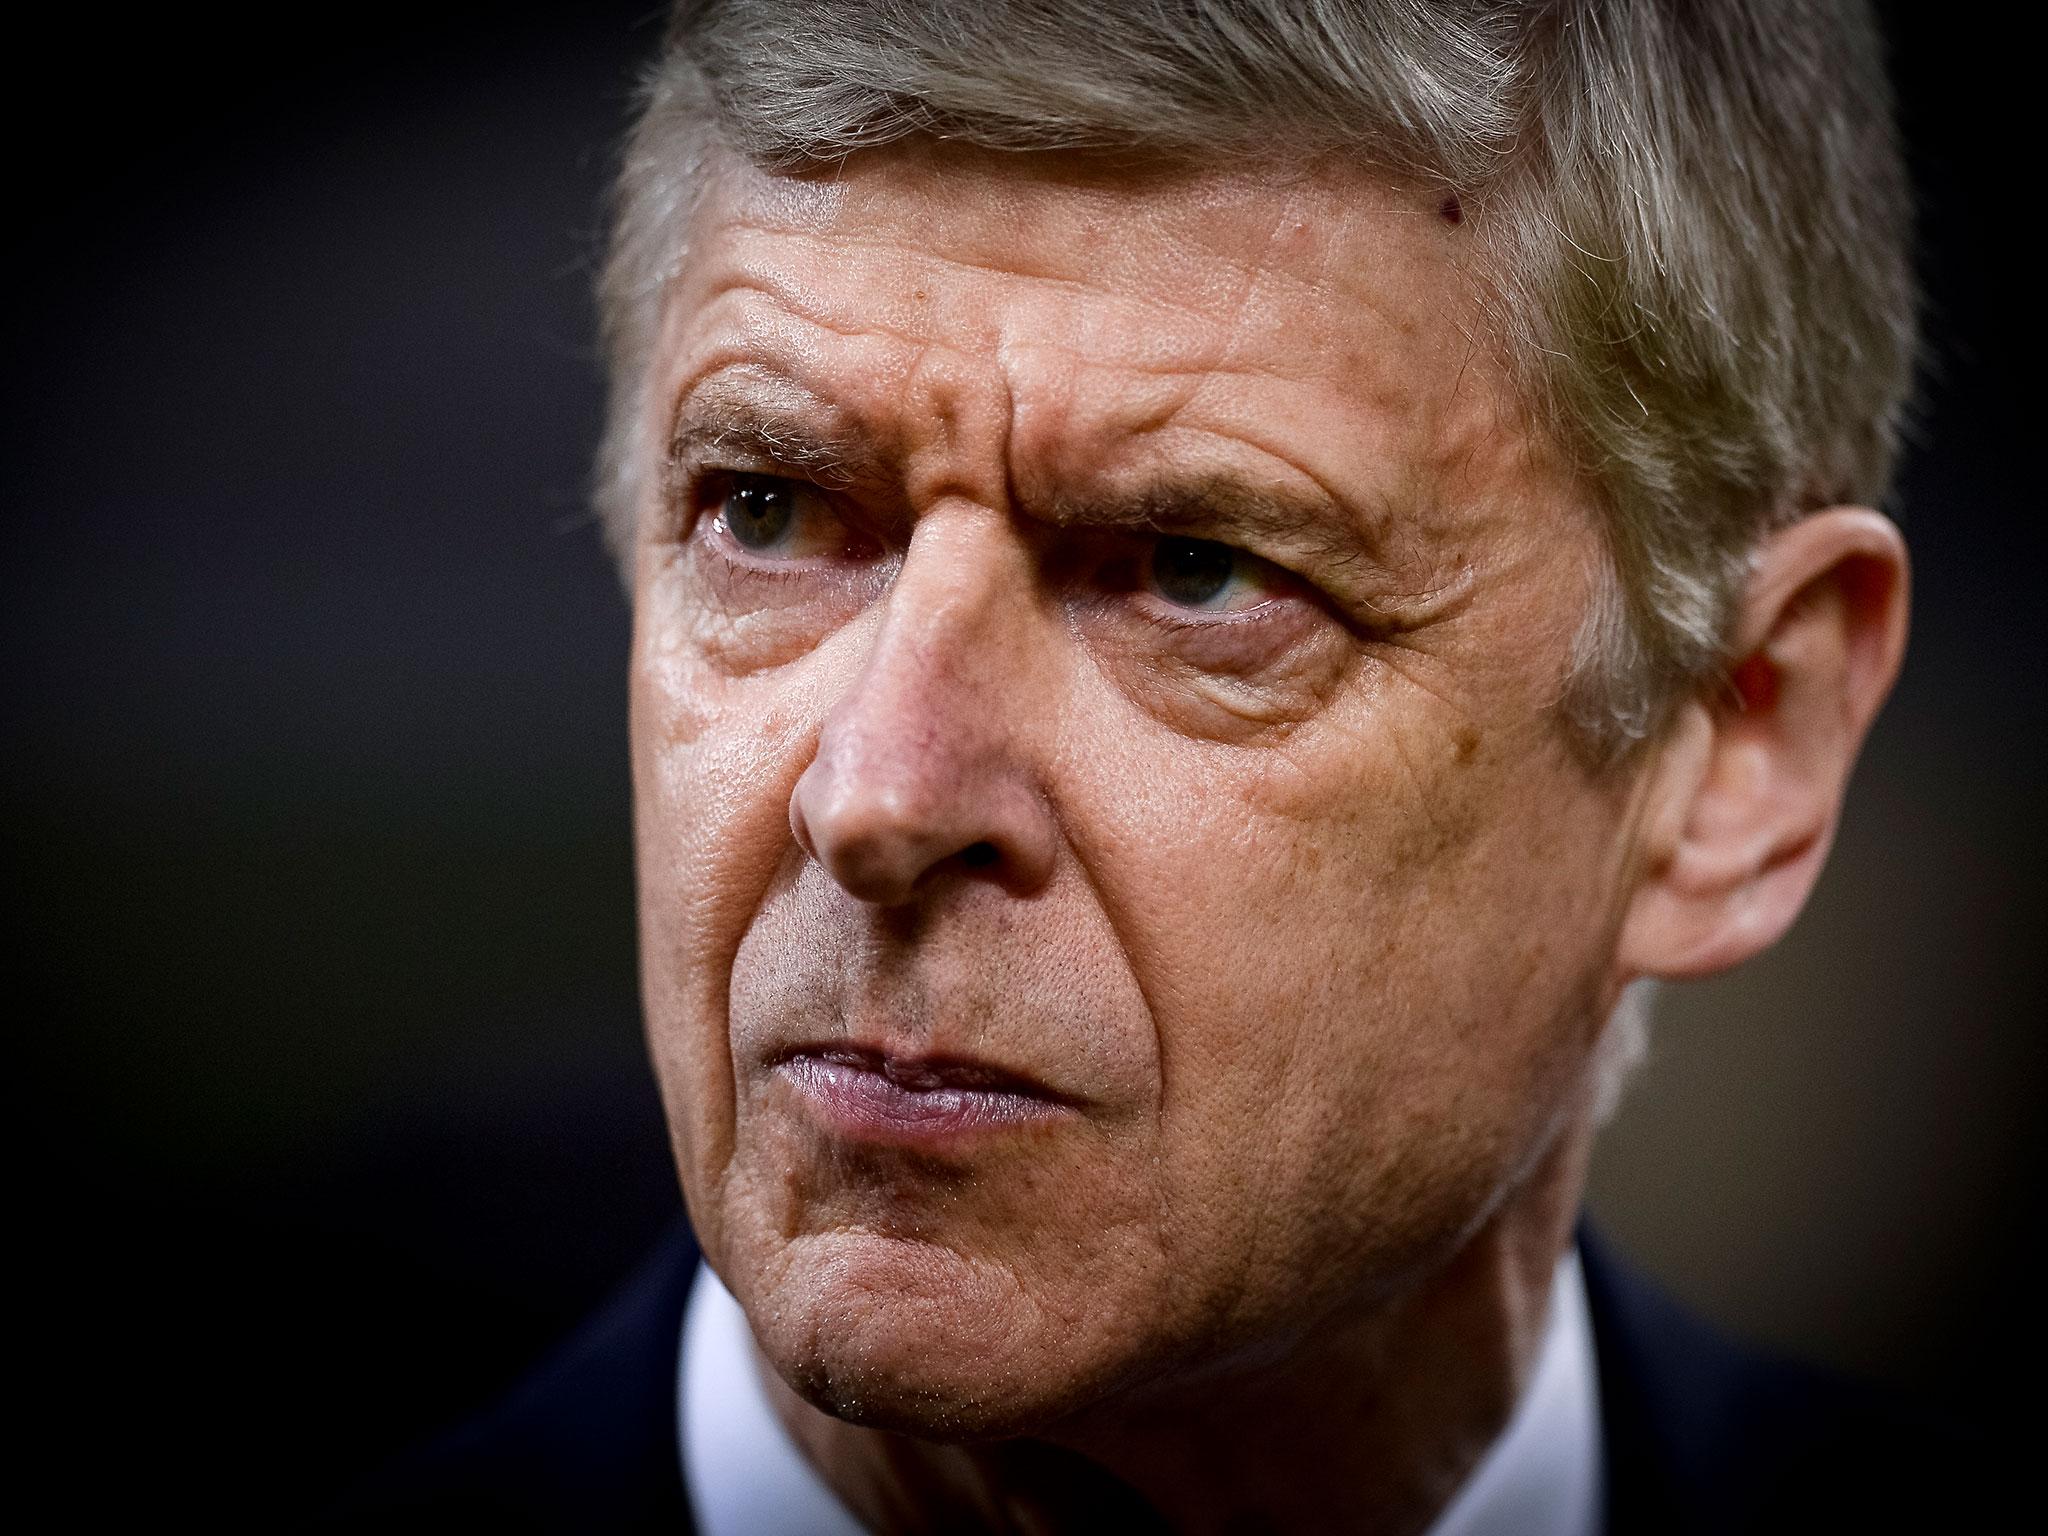 Wenger has once again found himself under pressure